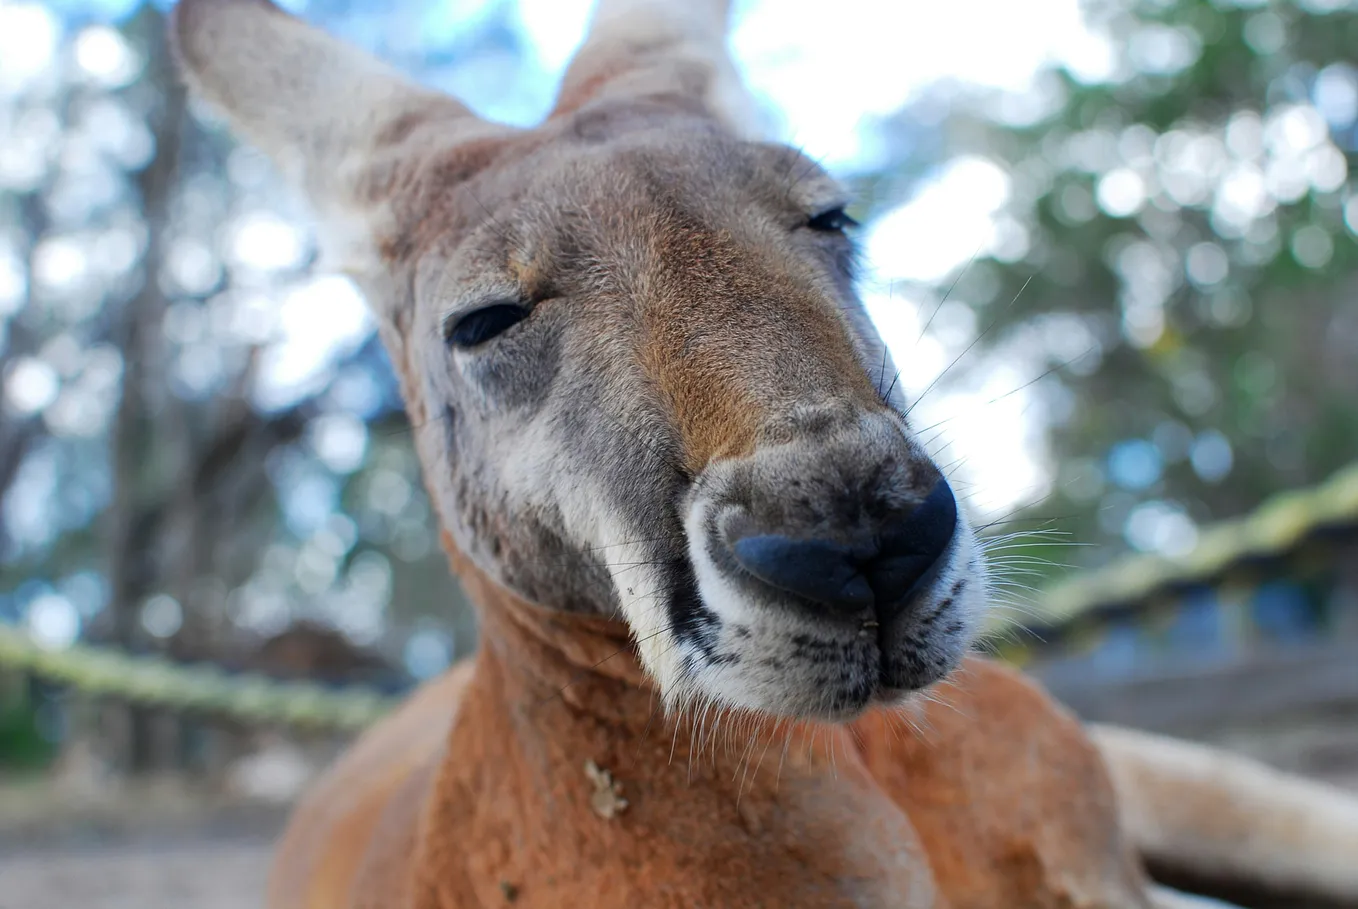 The writer has pictured the face of an older kangaroo with a look of wisdom.